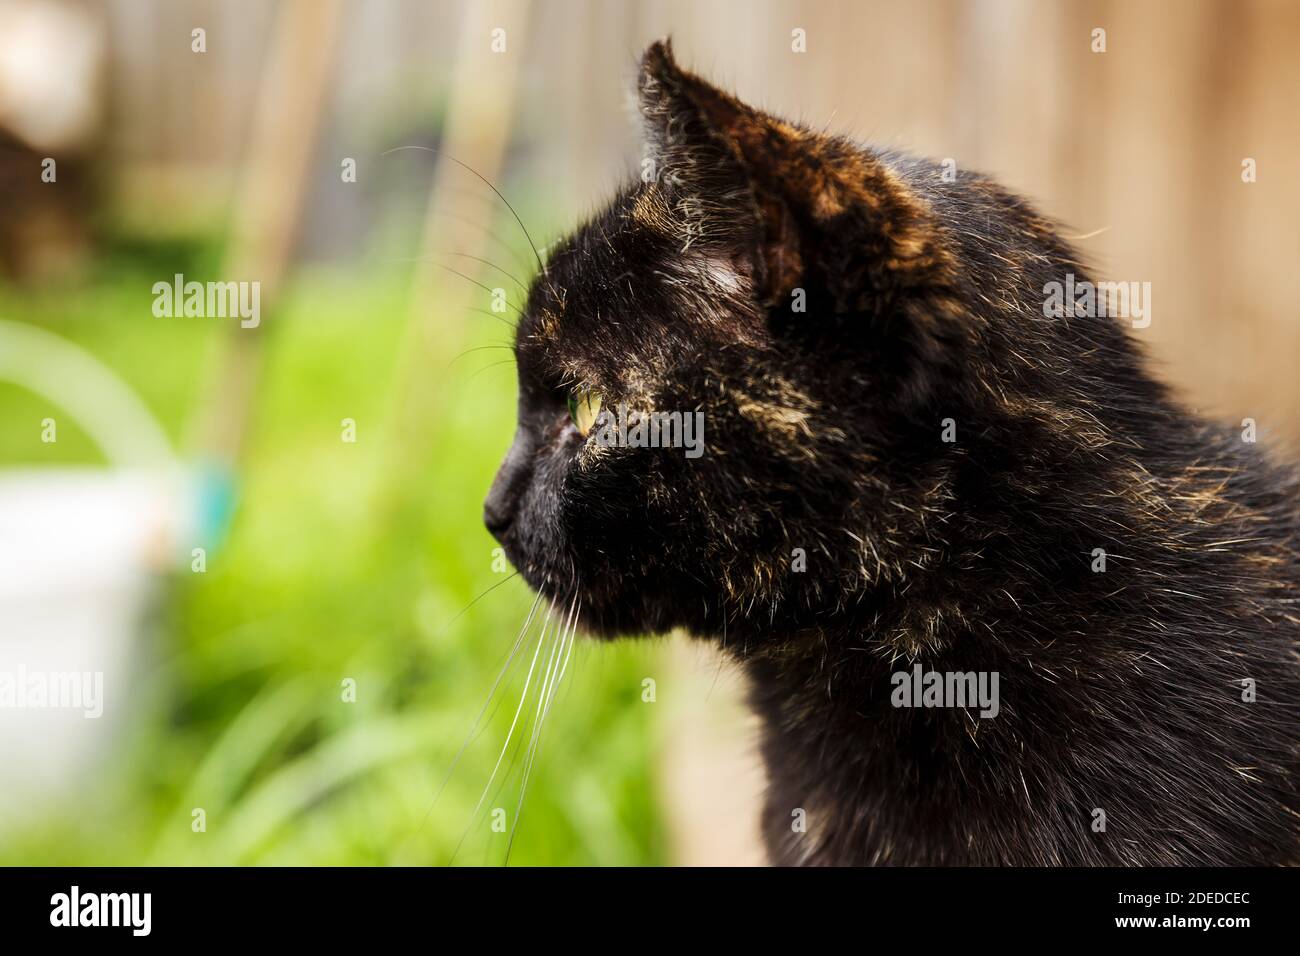 black cat. The cat looks to the side. Close-up of a cat's head in profile Stock Photo